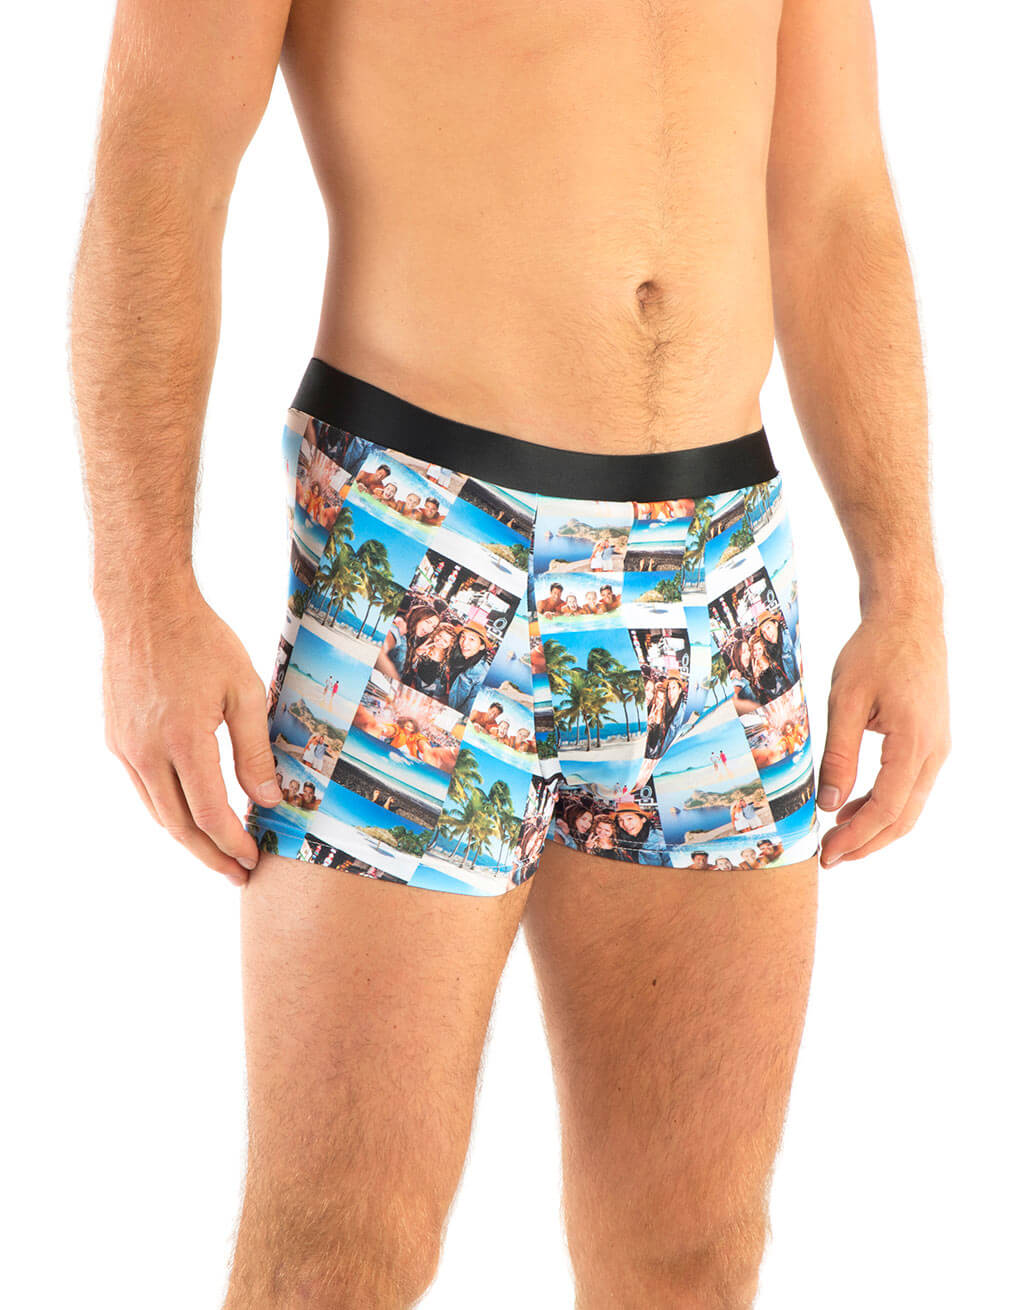 Personalised Photo Collage Boxers